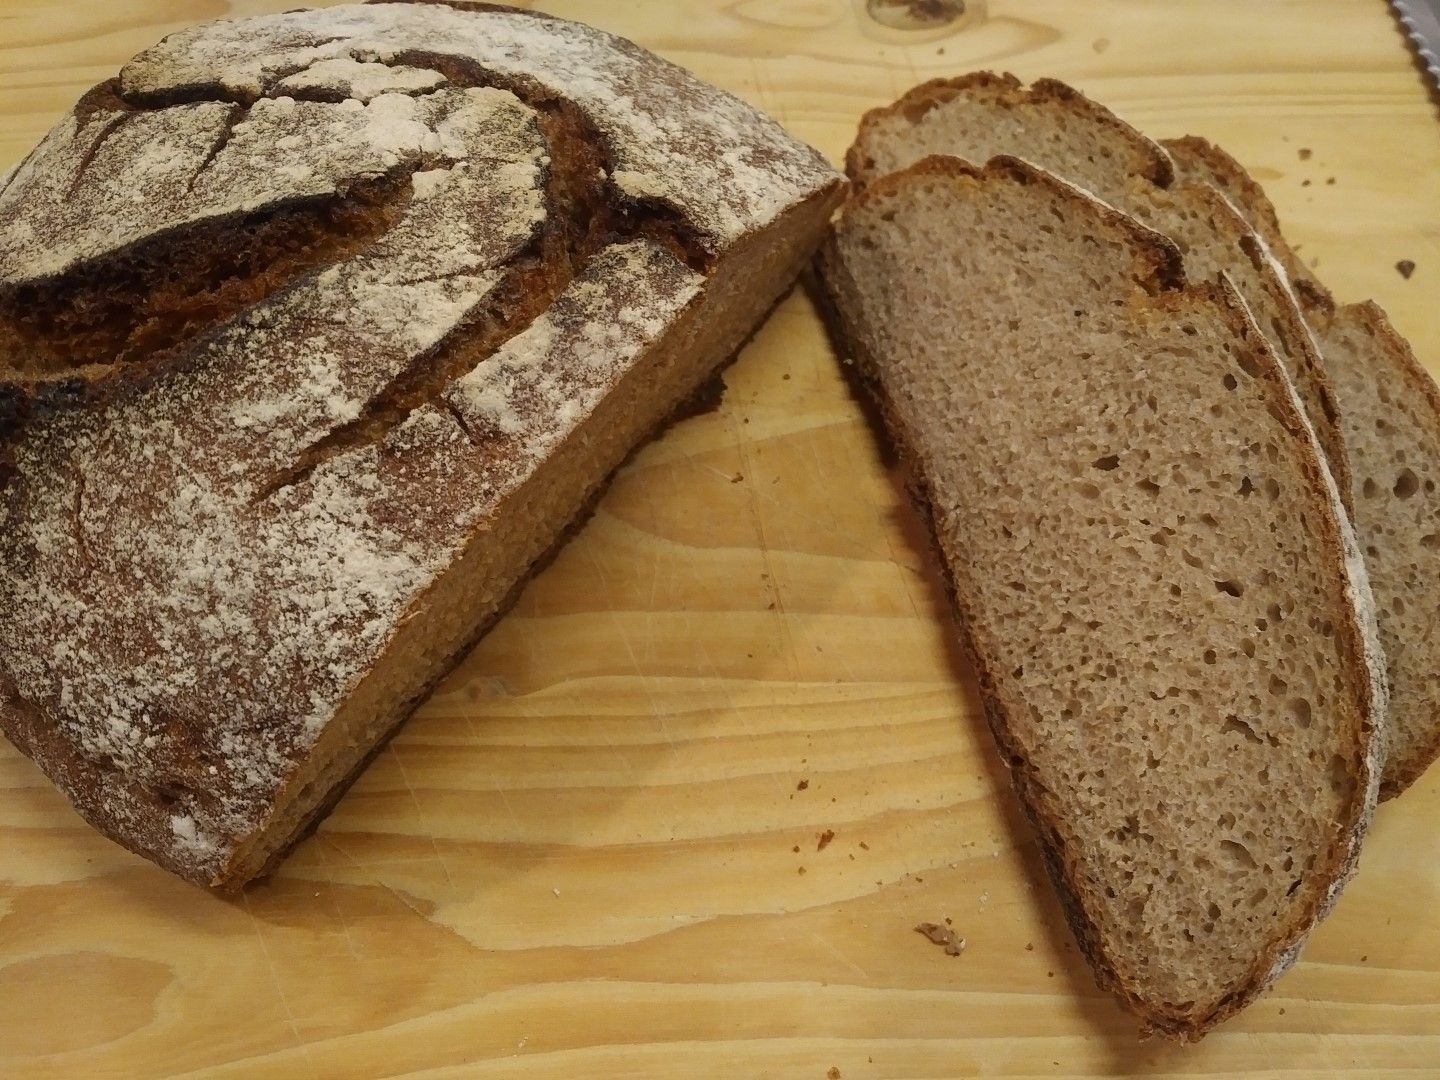 Is bread healthy? – It’s complicated